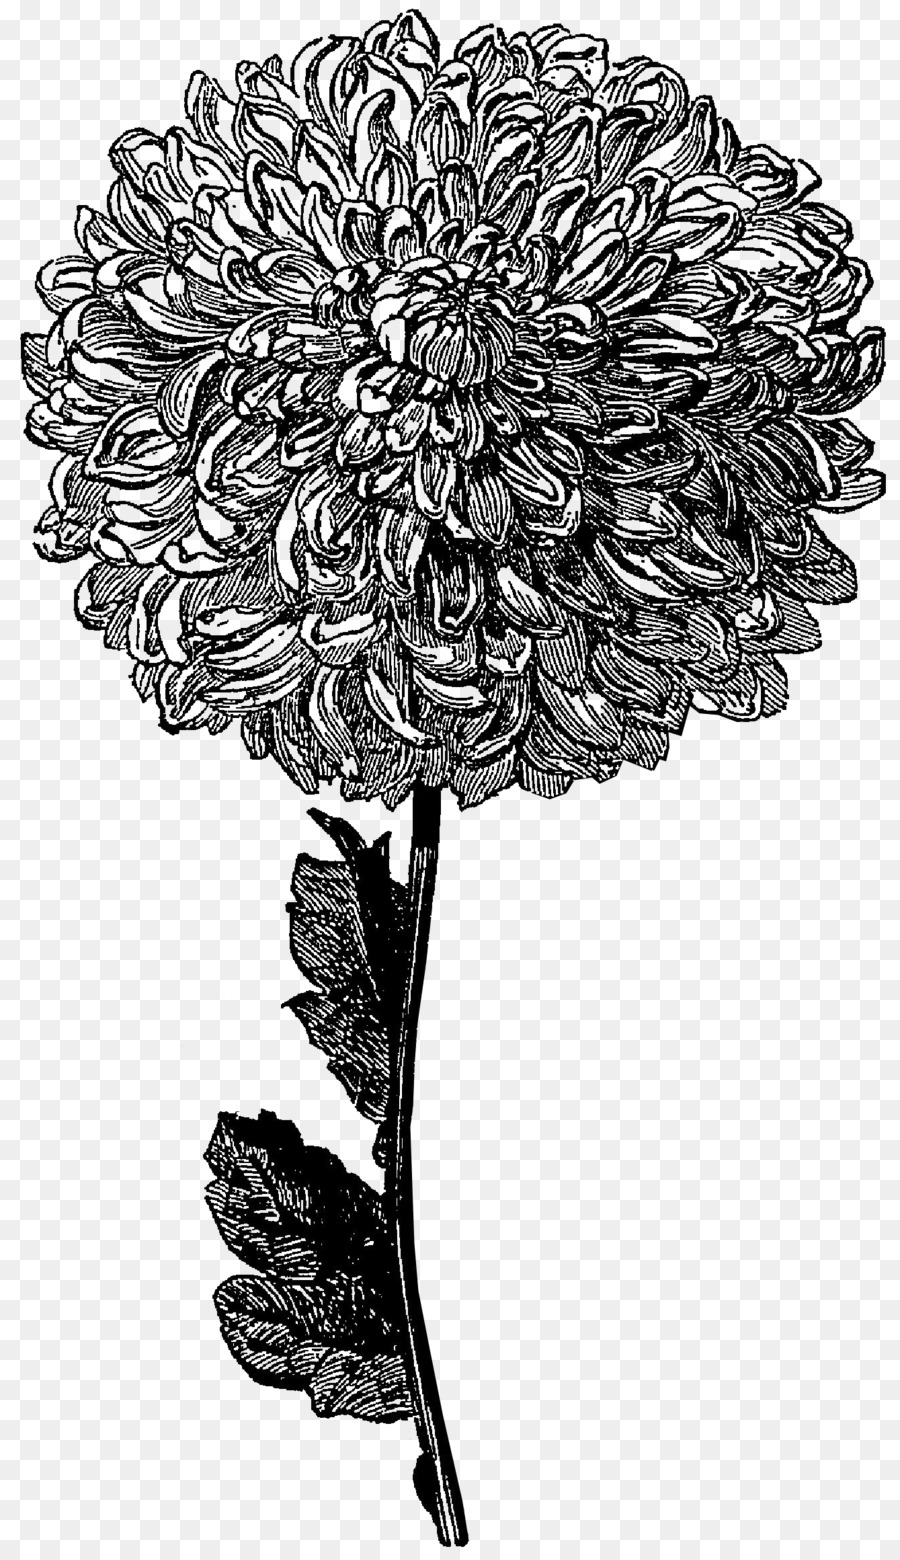 Flower Drawing Black and white Clip art - Gray Flowers Cliparts png download - 1339*2310 - Free Transparent Flower png Download.